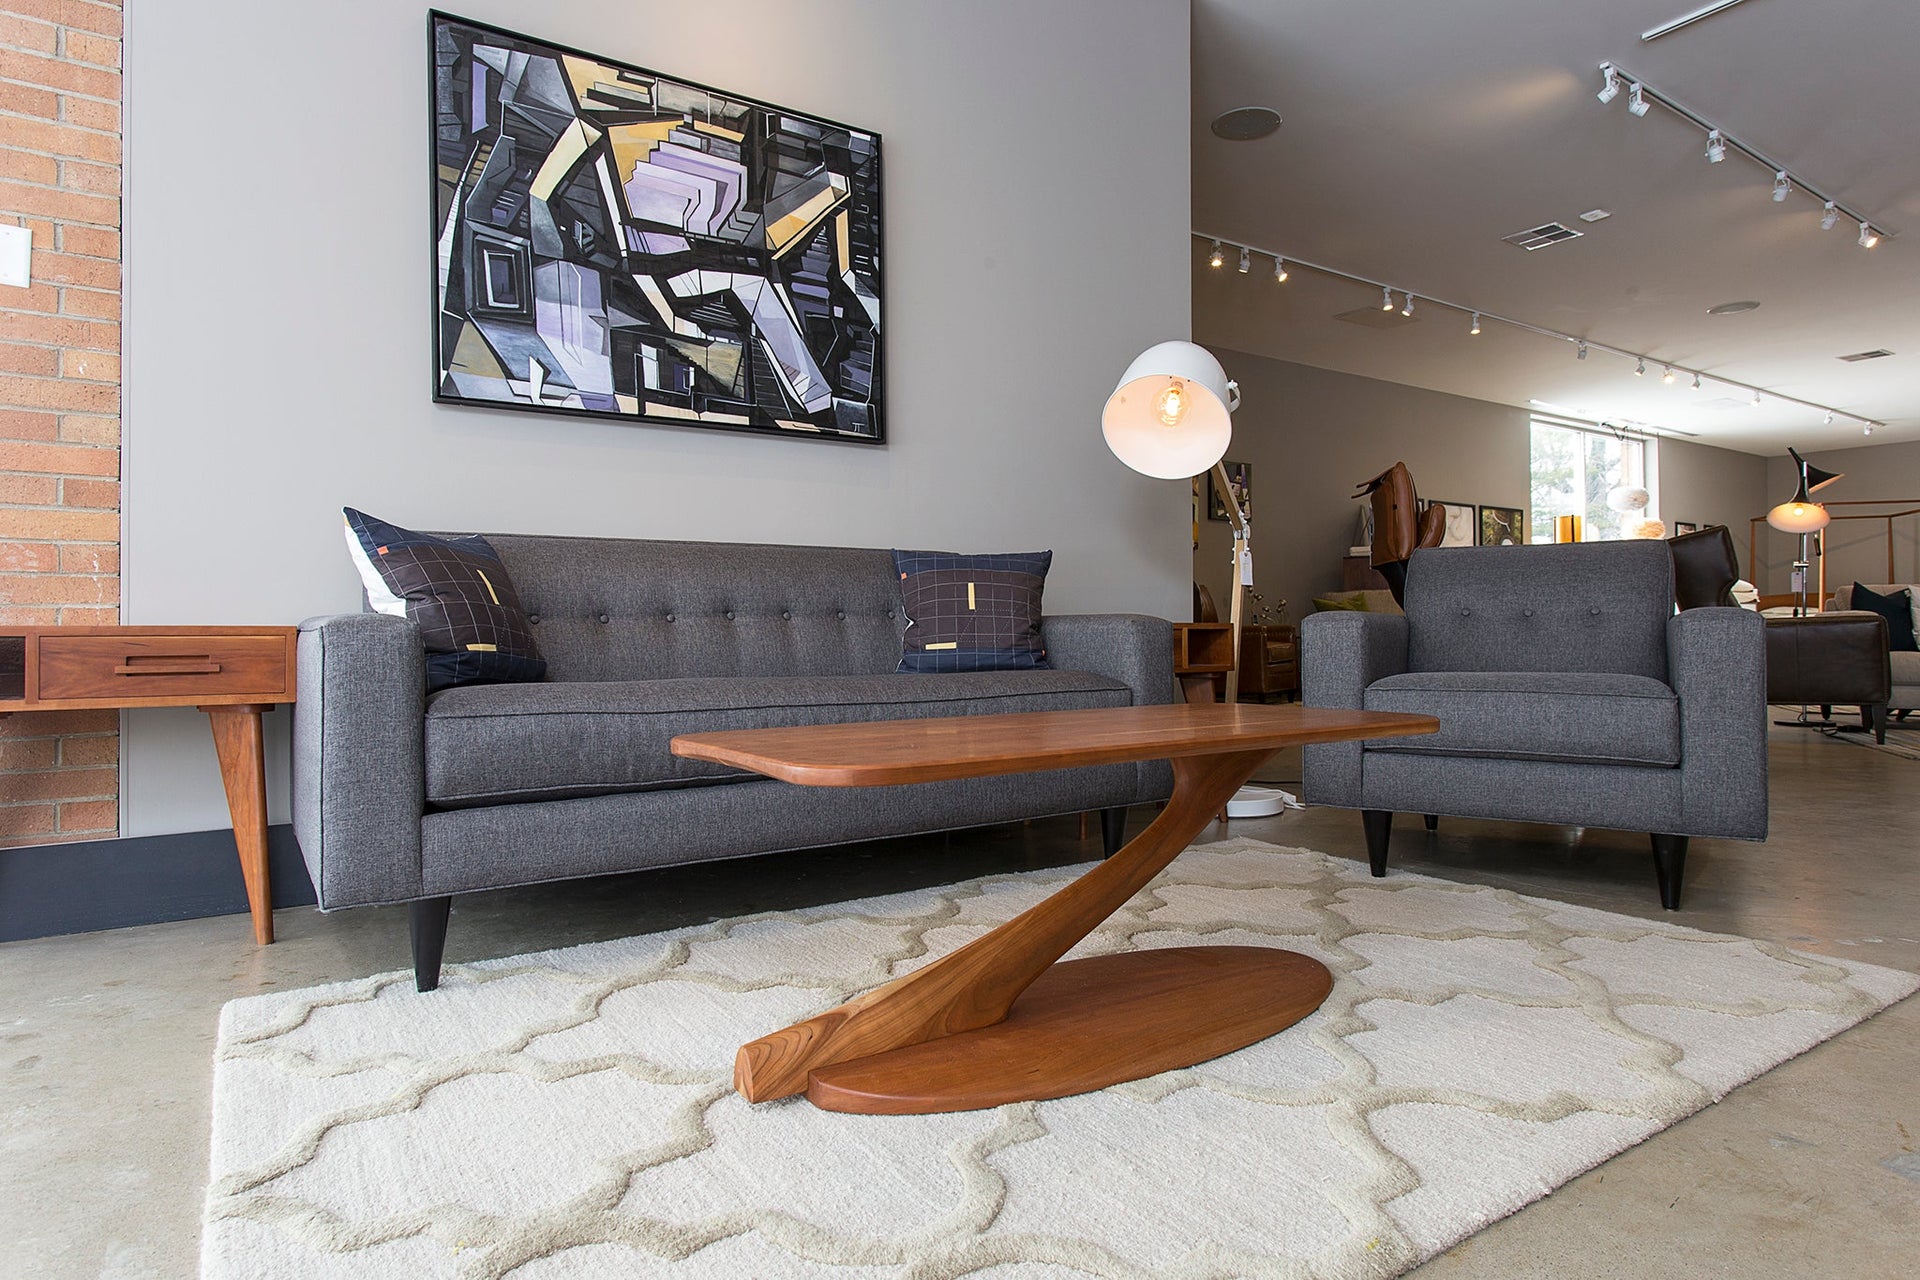 Helpful Tips on Choosing the Right Coffee Table For Your Space